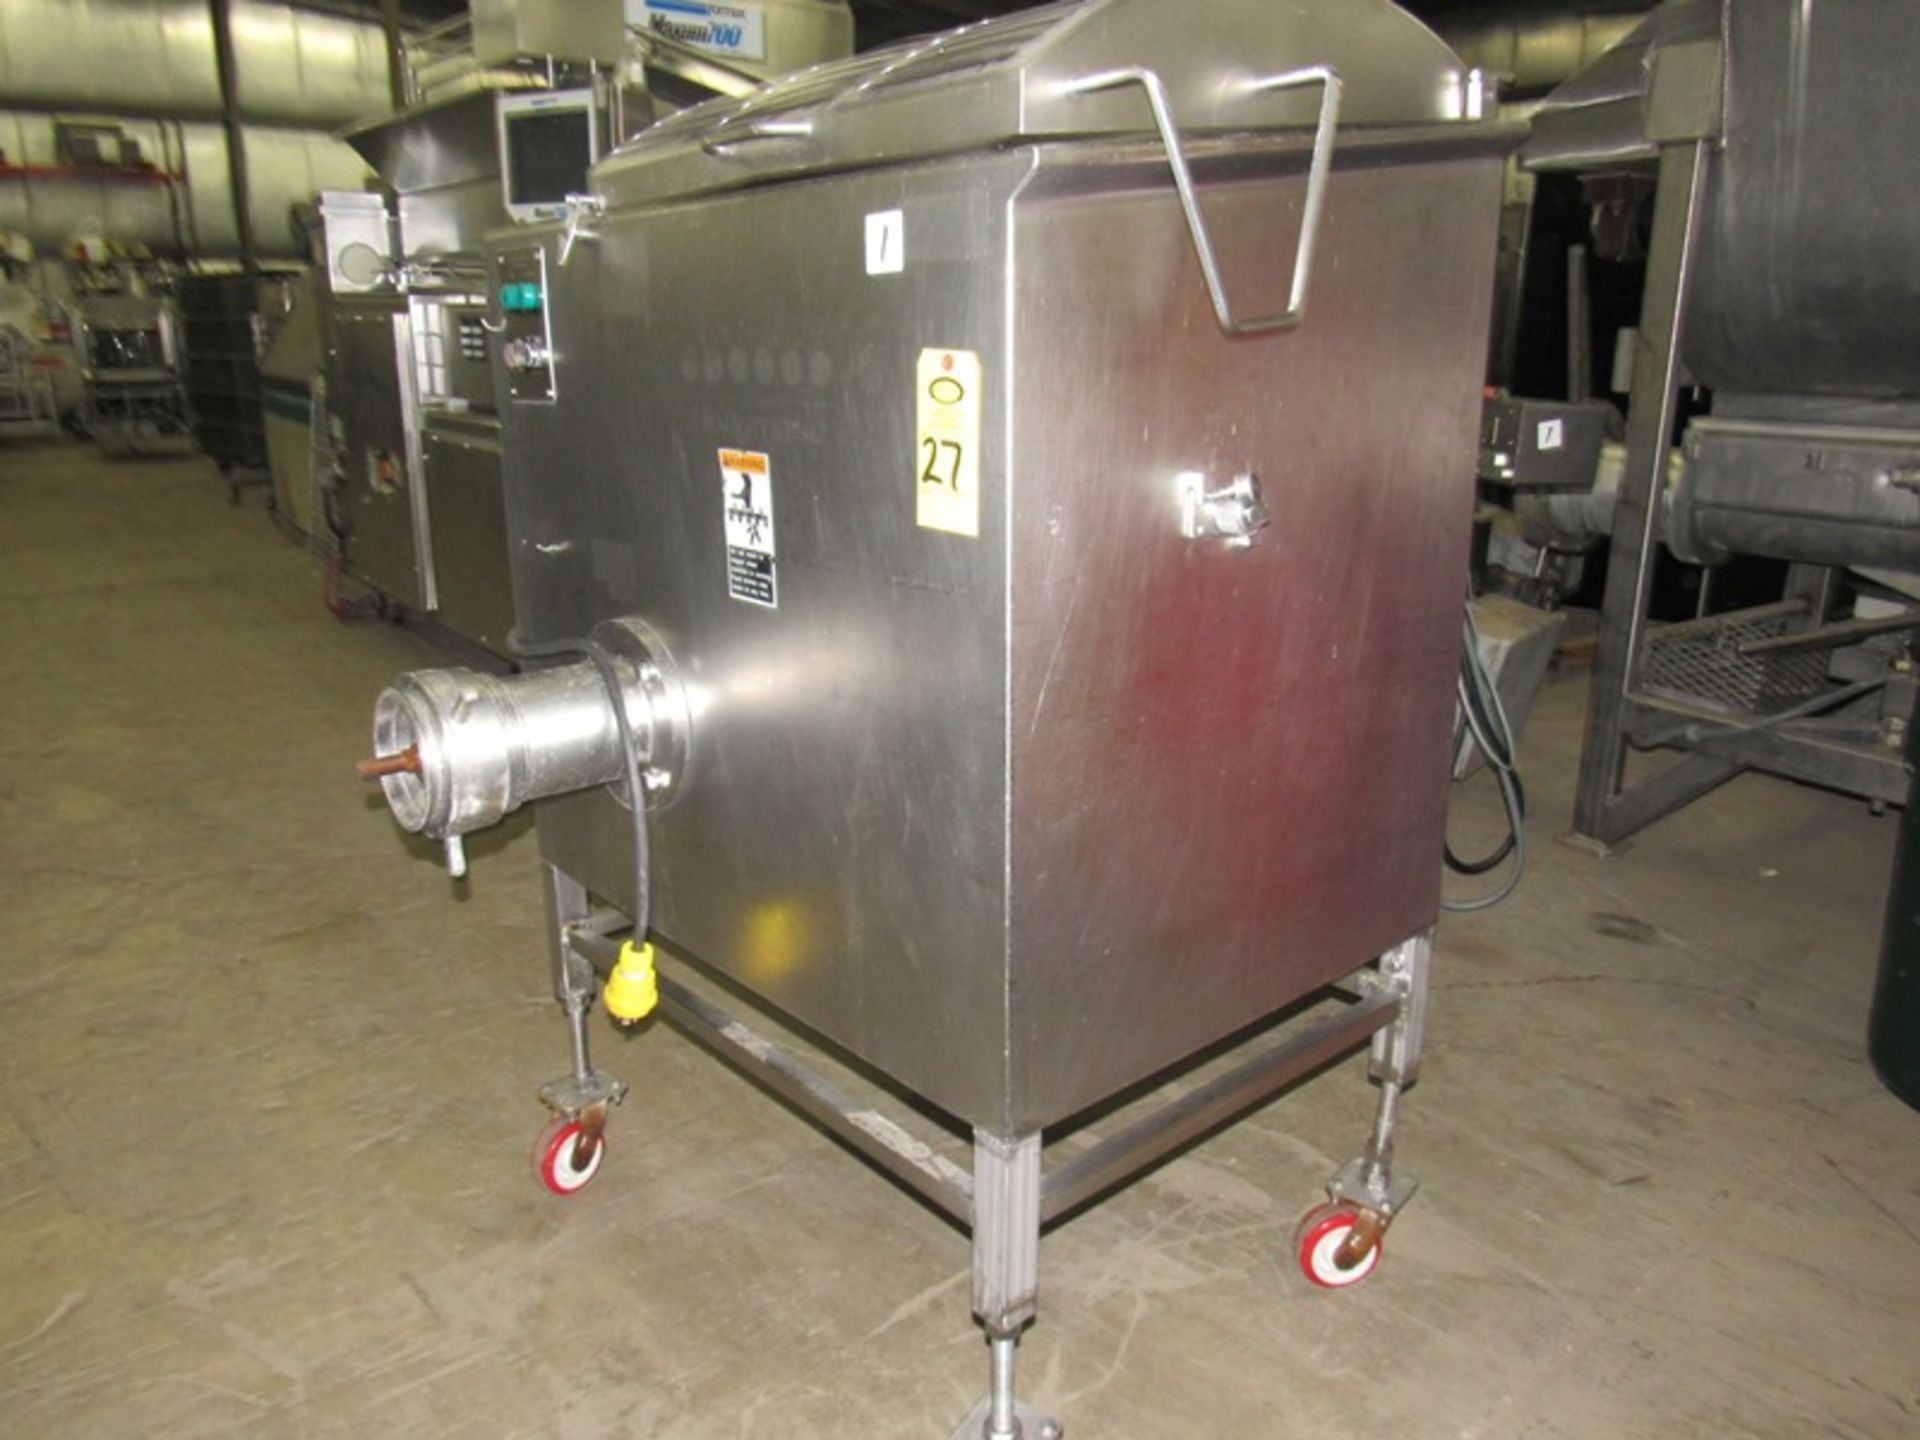 Hollymatic Stainless Steel Mixer/Grinder, 20" W X 29" L X 22" D hopper, 5" Dia. barrel, on wheels " - Image 2 of 6